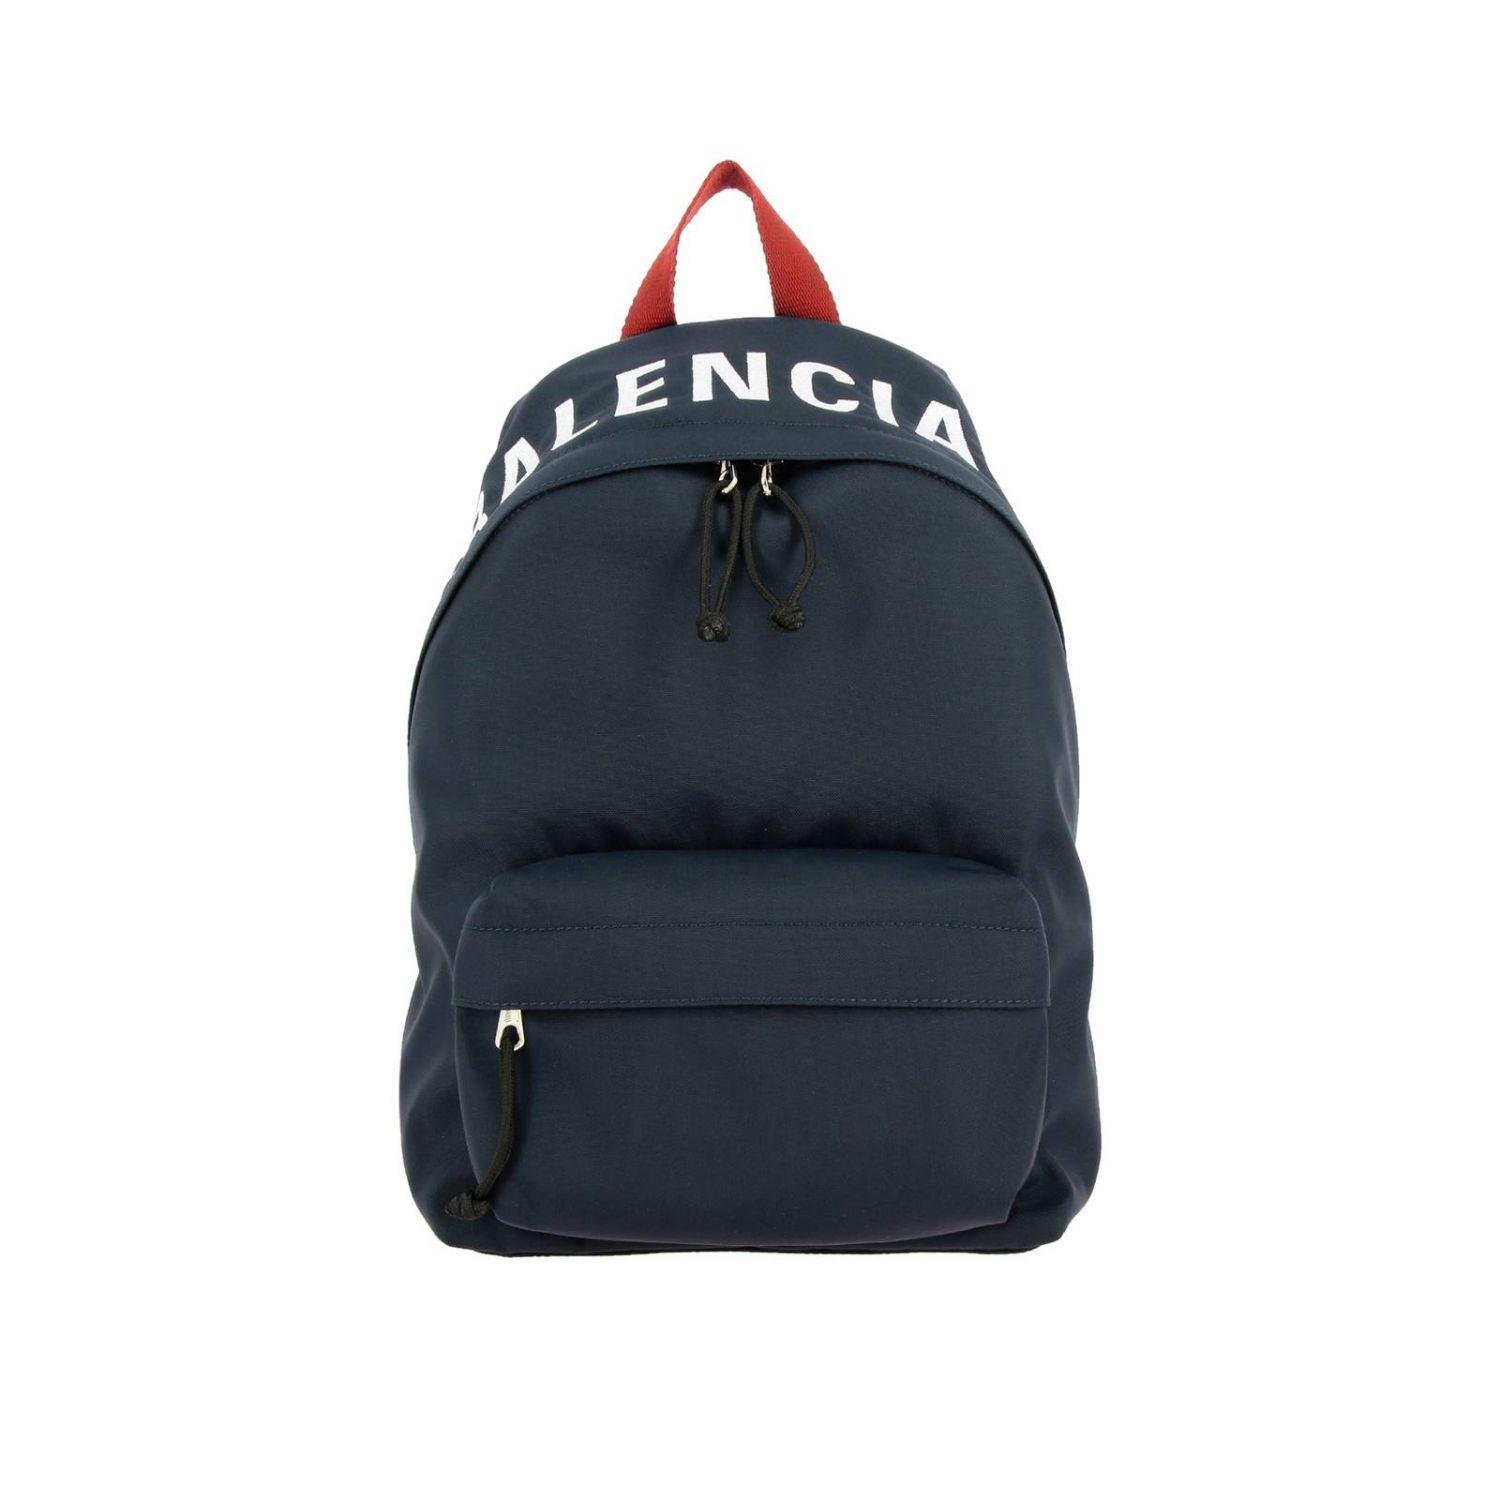 Balenciaga Synthetic Nylon Backpack With Logo in Blue - Save 20% - Lyst